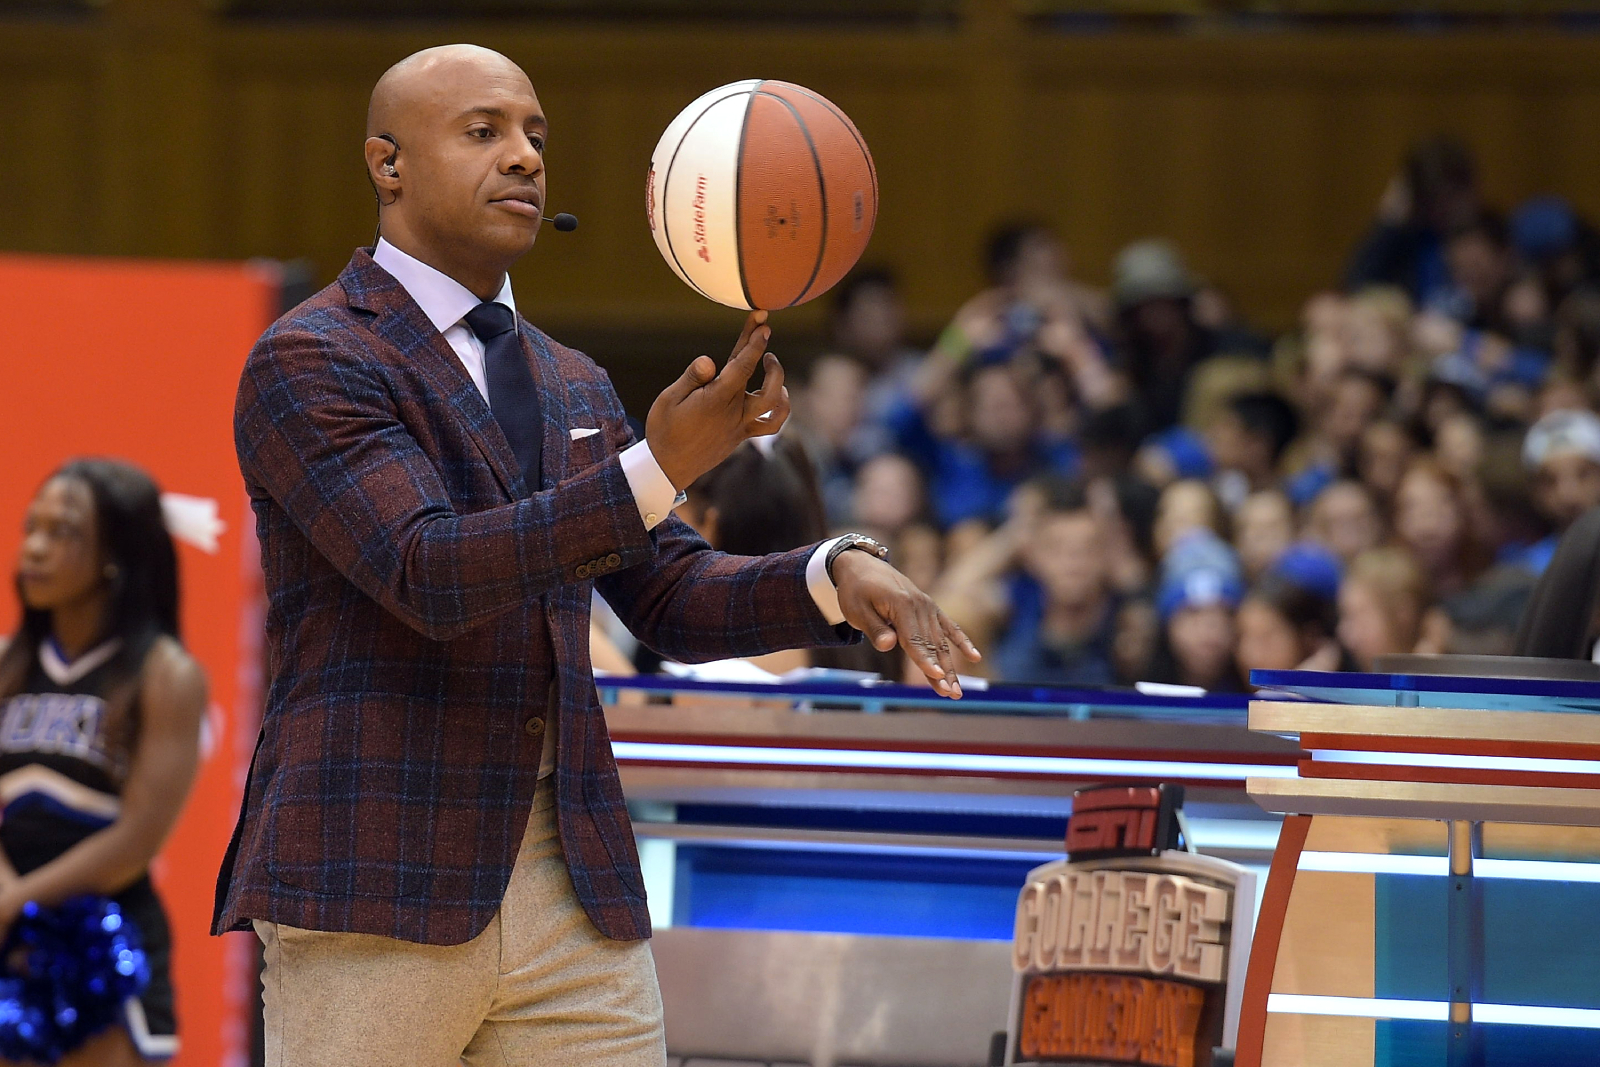 How Good Was ESPN’s Jay Williams During His Basketball Career?